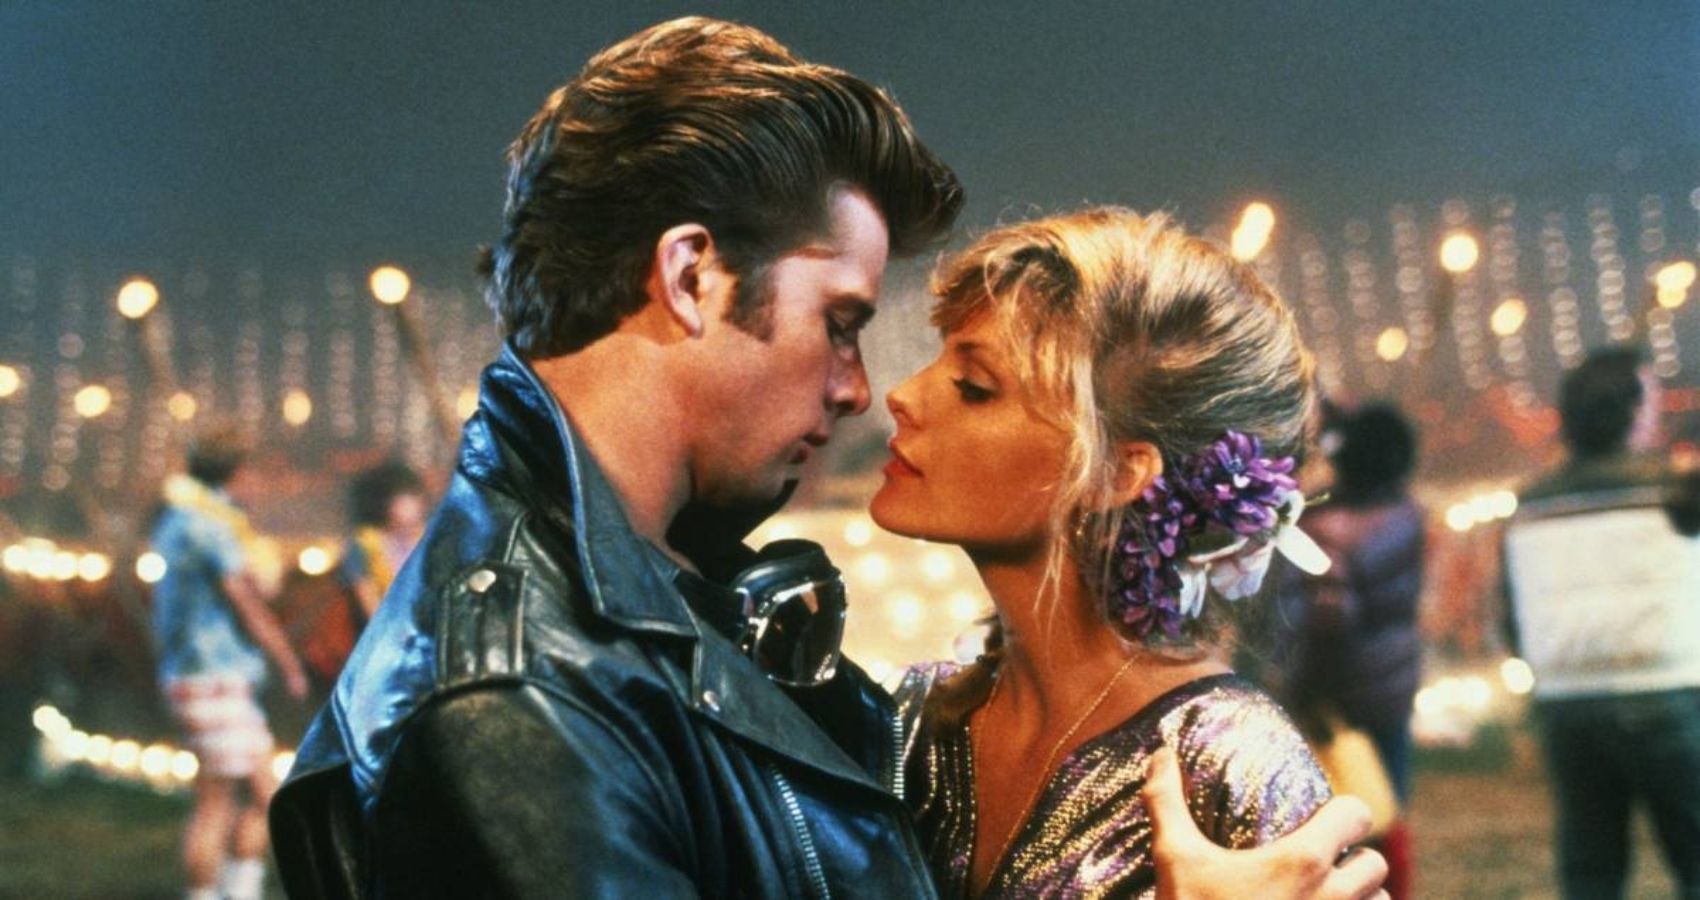 Grease 2 - Maxwell Caulfield and Michelle Pfeiffer